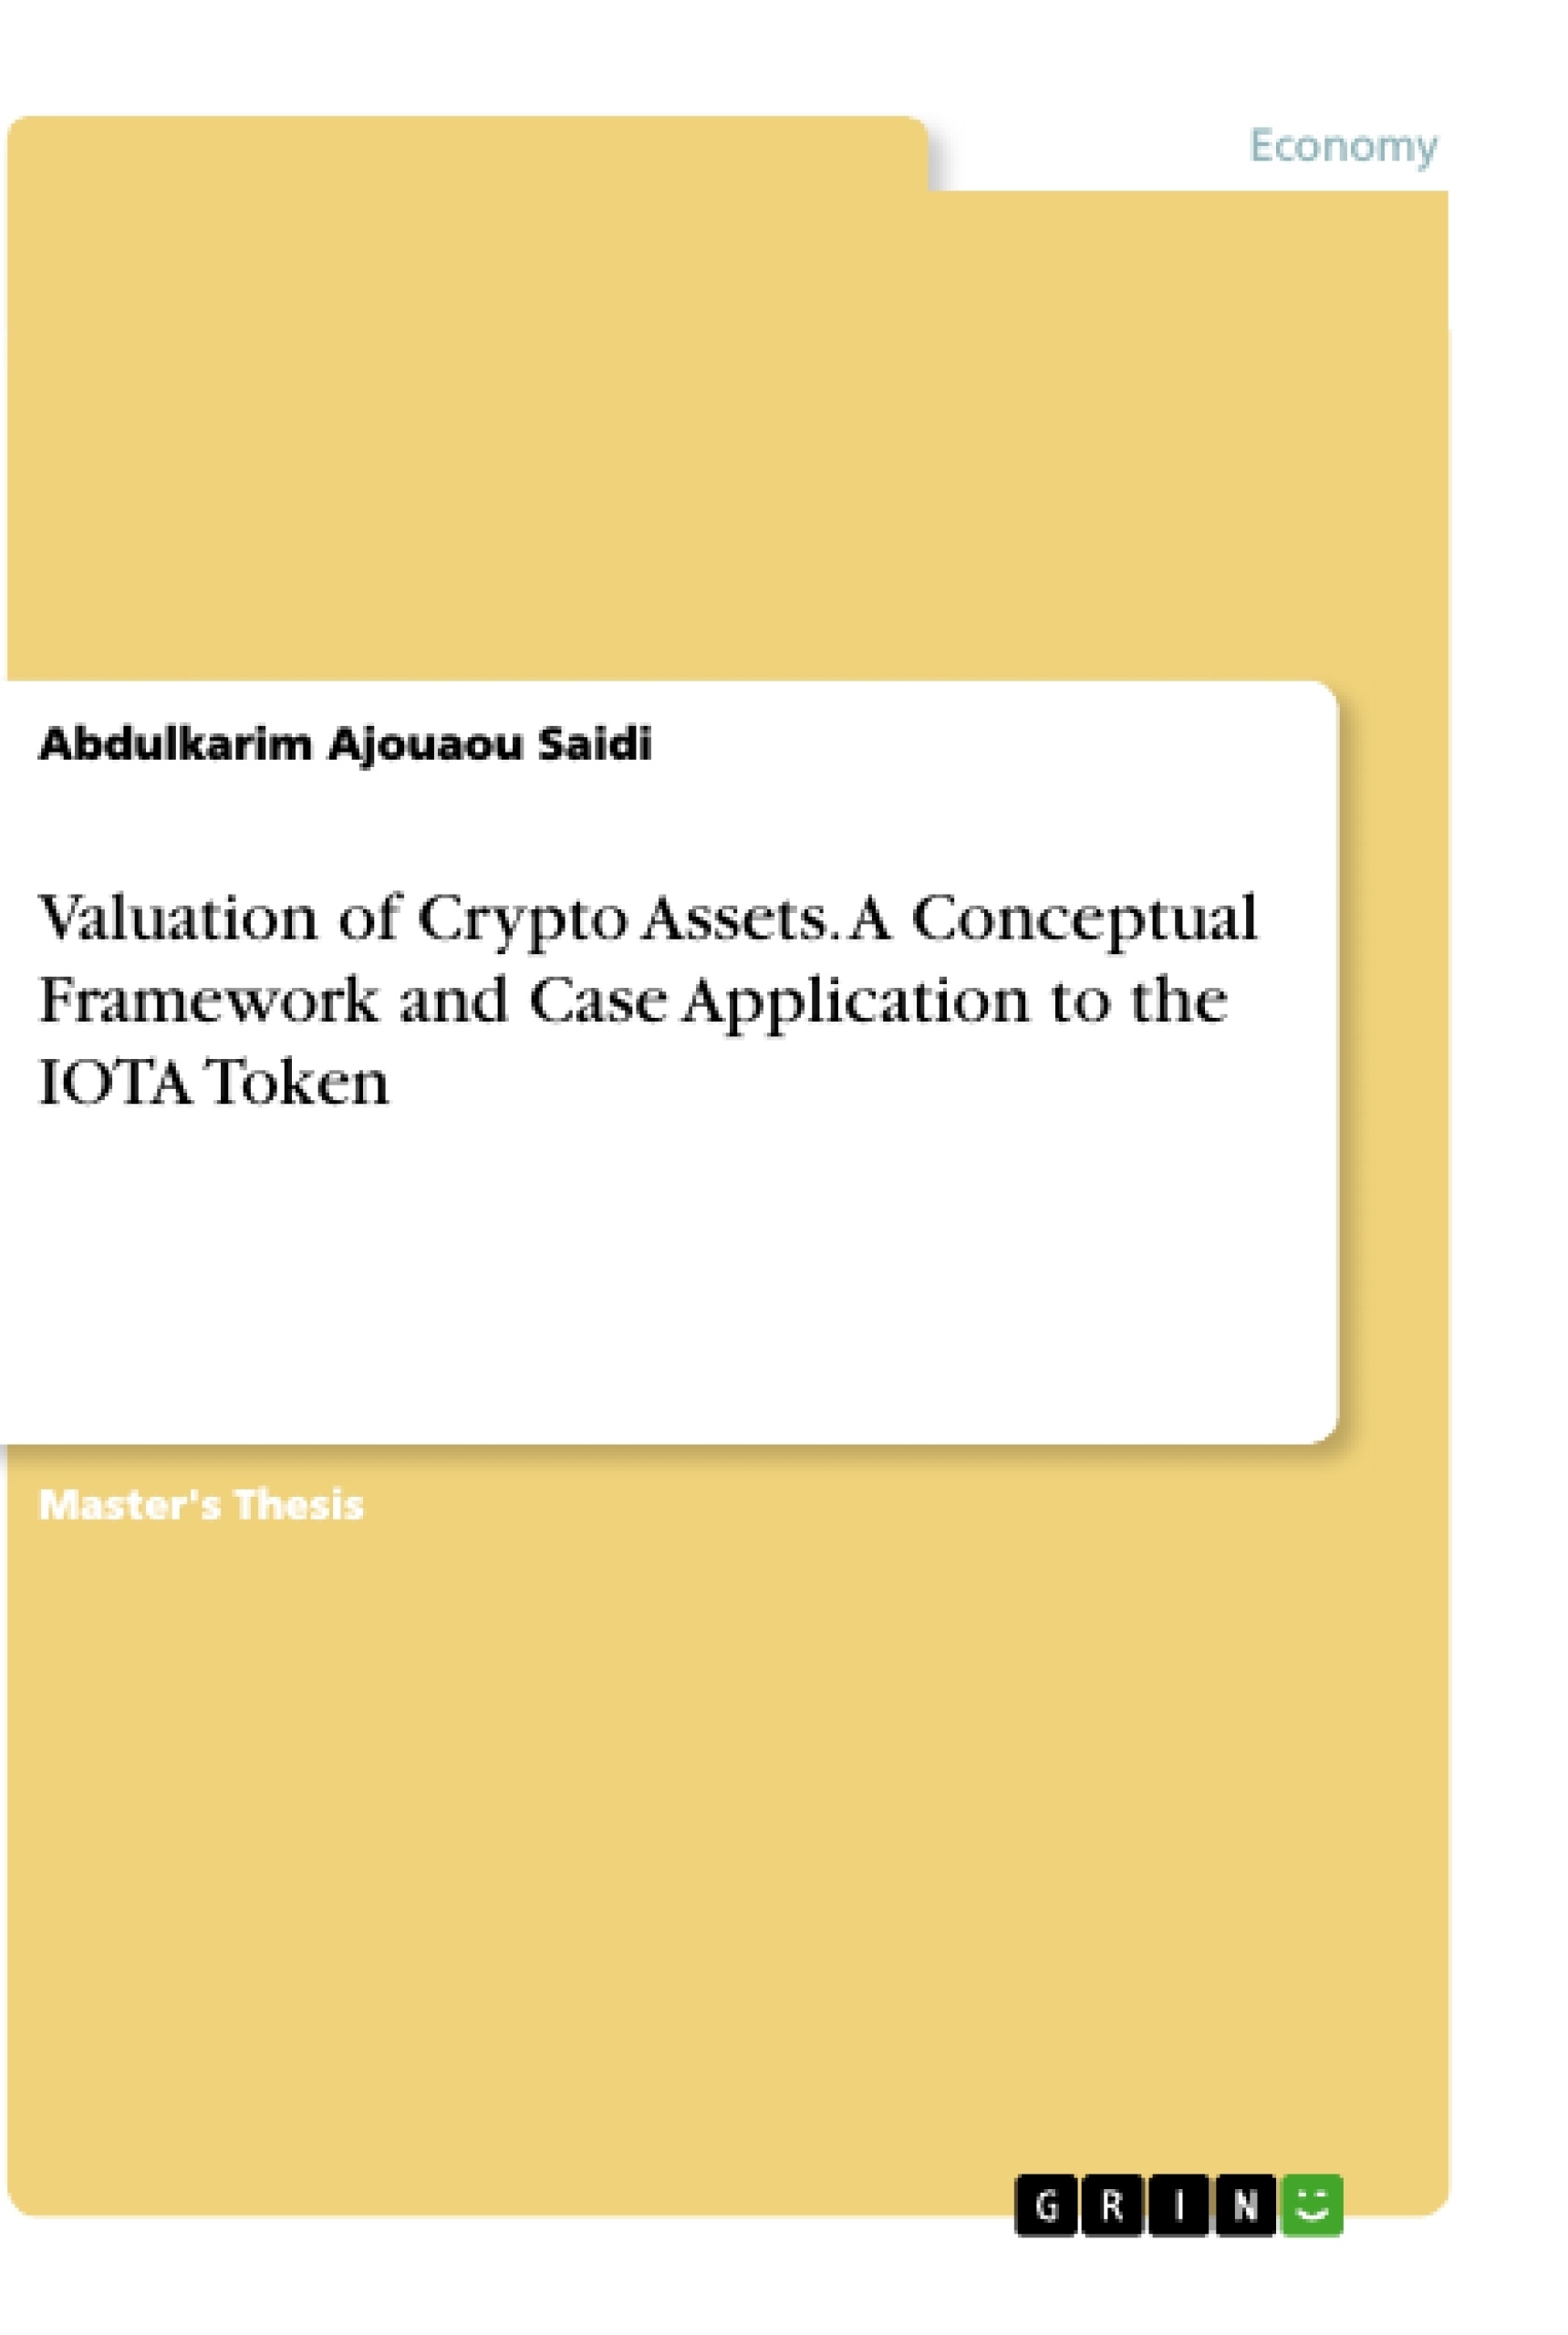 Titre: Valuation of Crypto Assets. A Conceptual Framework and Case Application to the IOTA Token